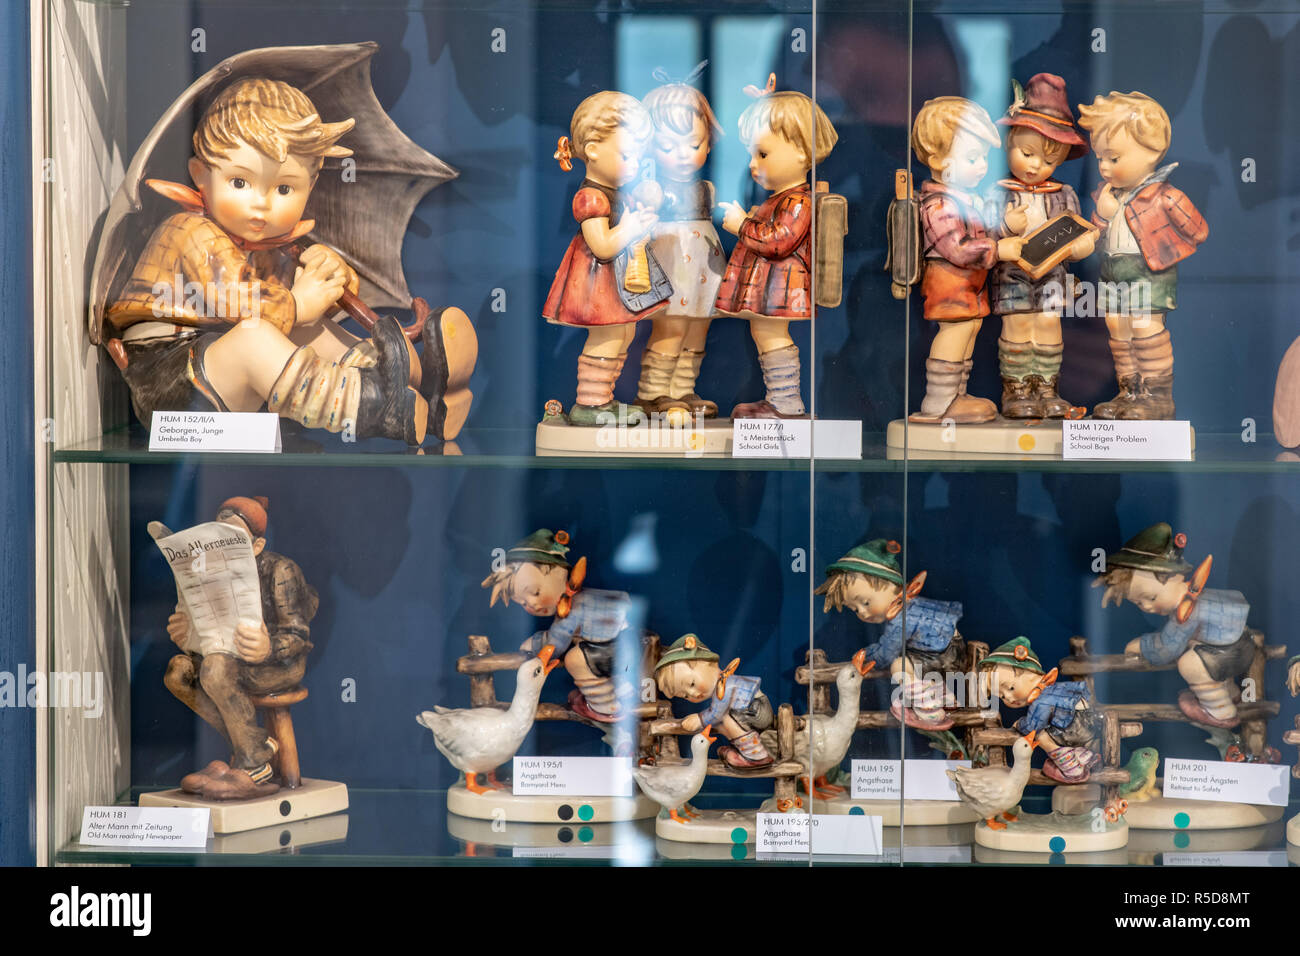 Germany. 29th Nov, 2018. Hummel stand in a showcase in the Berta Hummel Museum. The museum is to saved - in the form of a permanent exhibition in